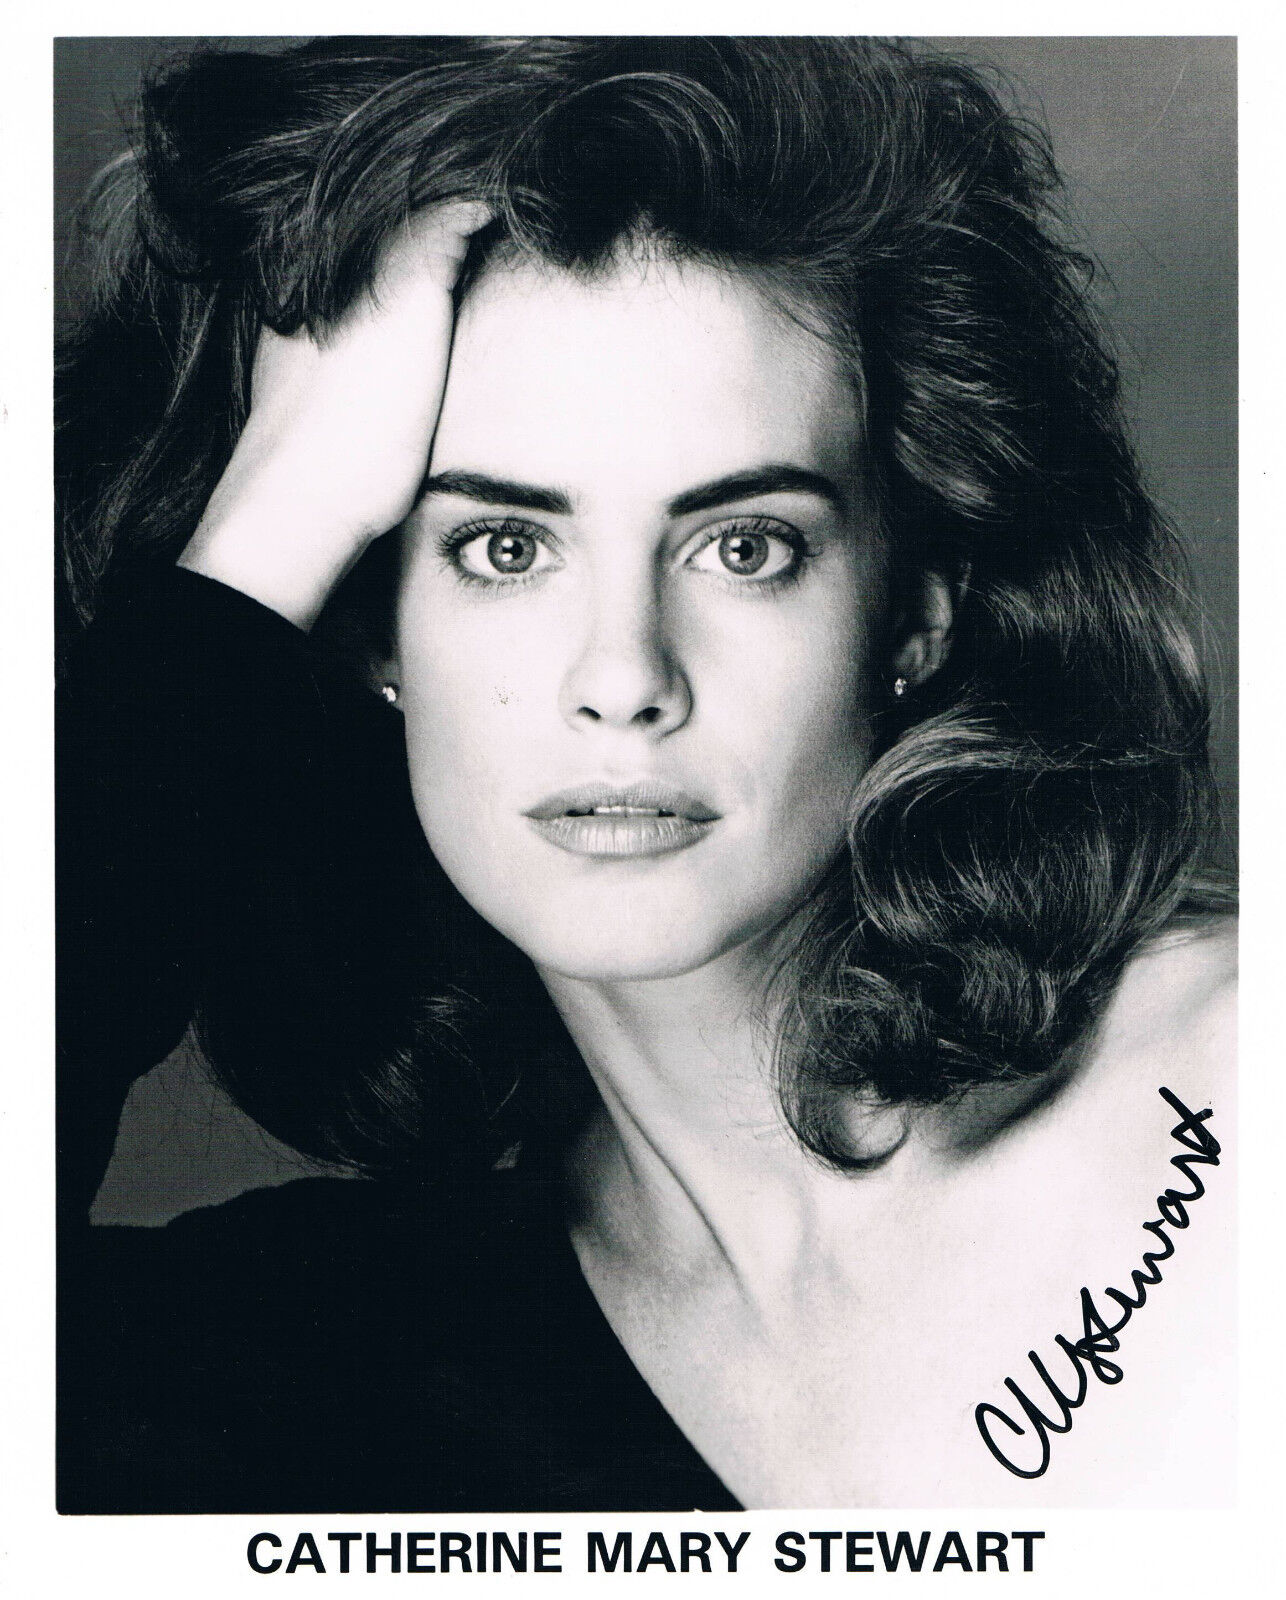 Catherine Mary Stewart 1959- genuine autograph Photo Poster painting 8x10